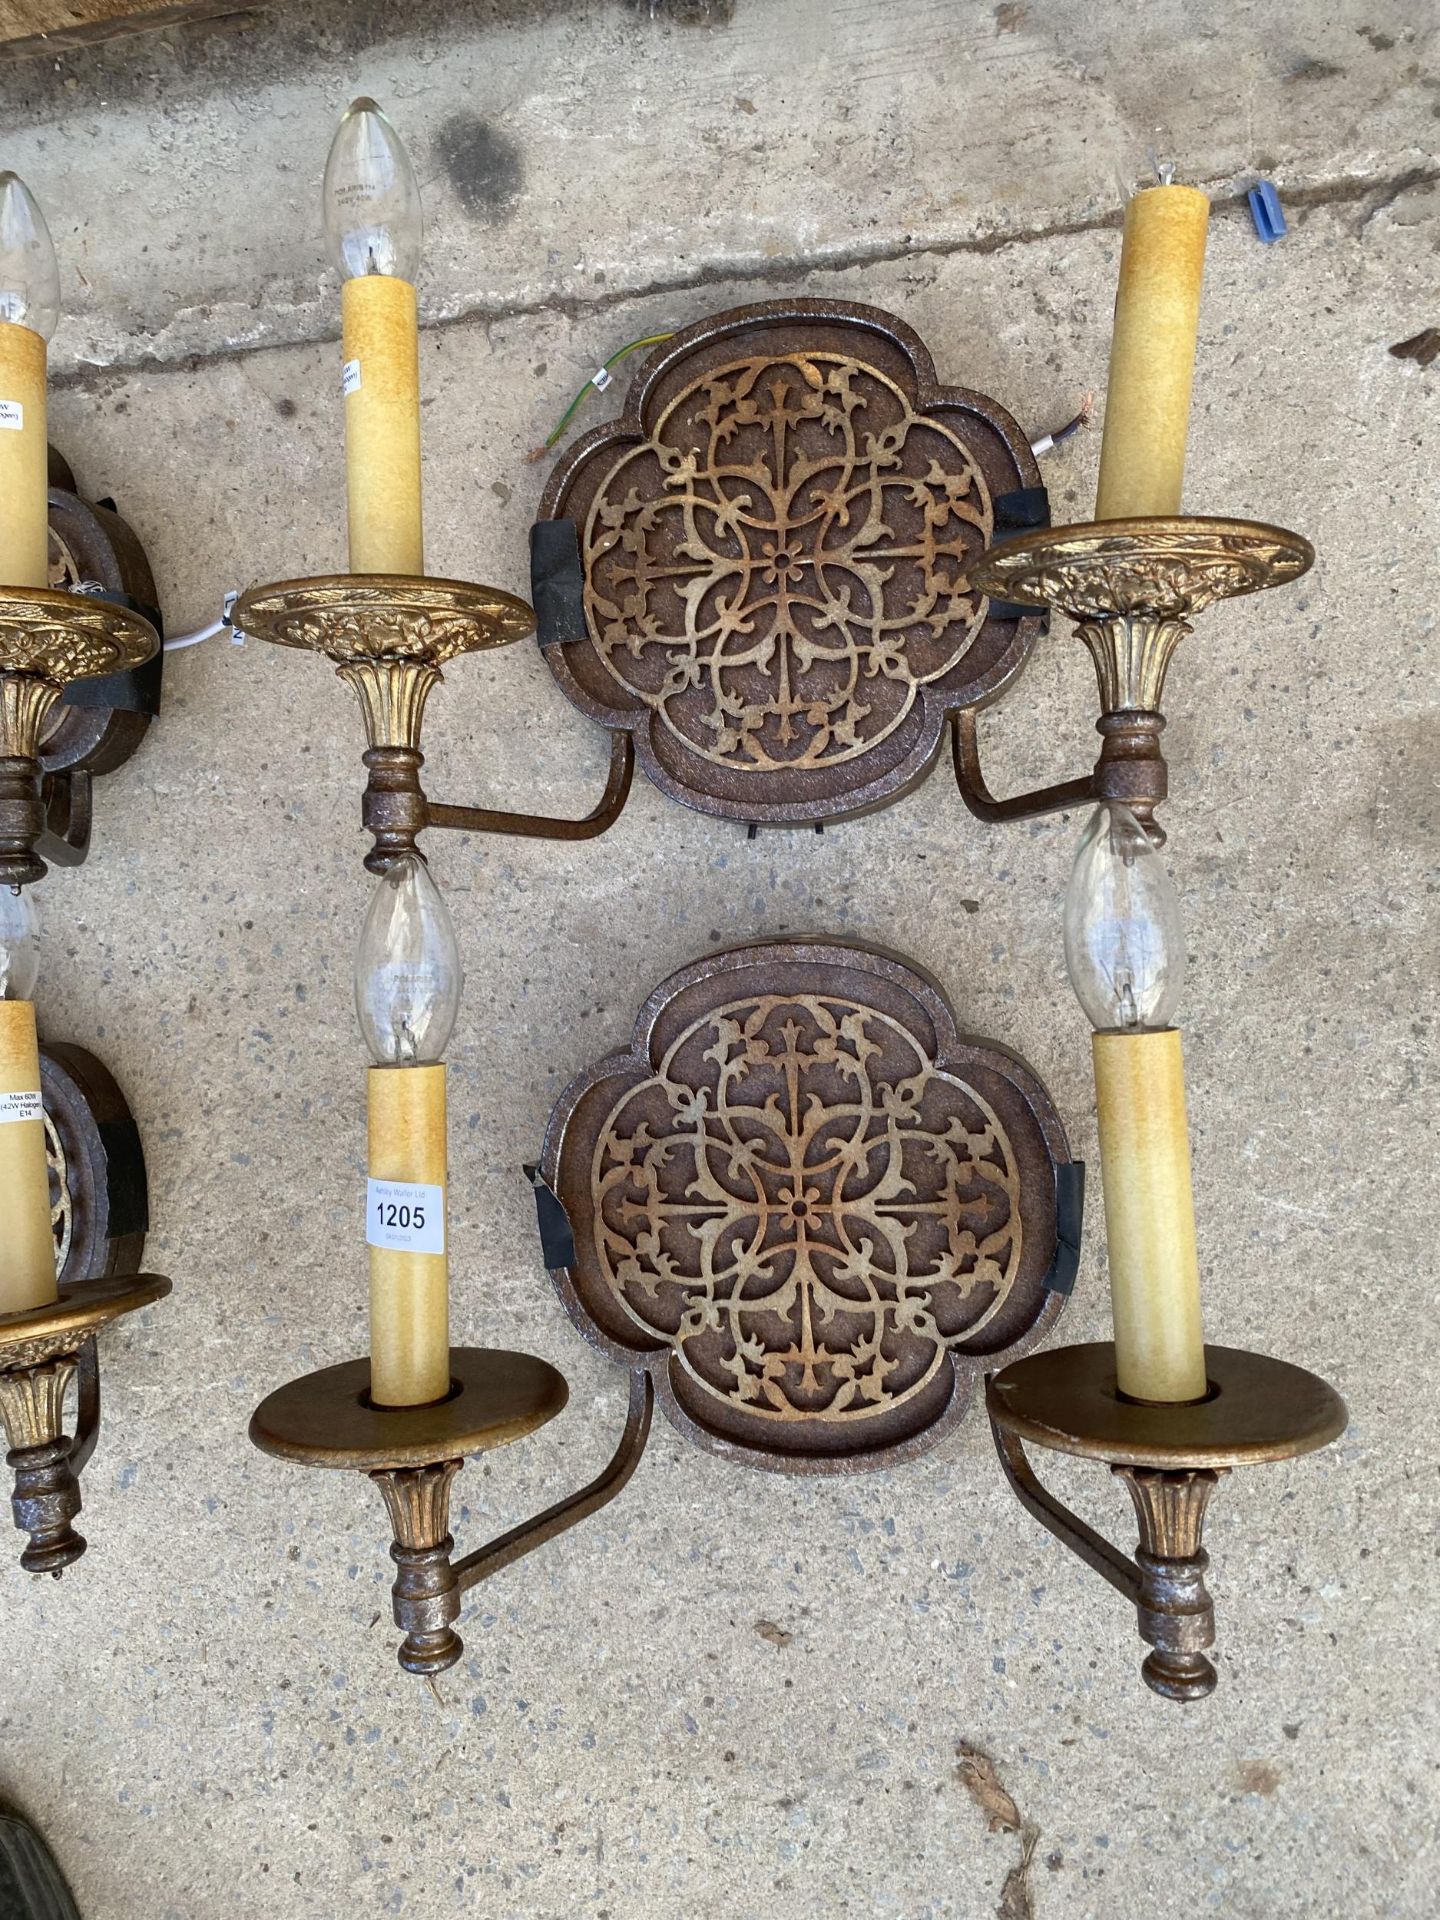 SIX VINTAGE STYLE TWO BRANCH WALL LIGHT FITTINGS - Image 3 of 4